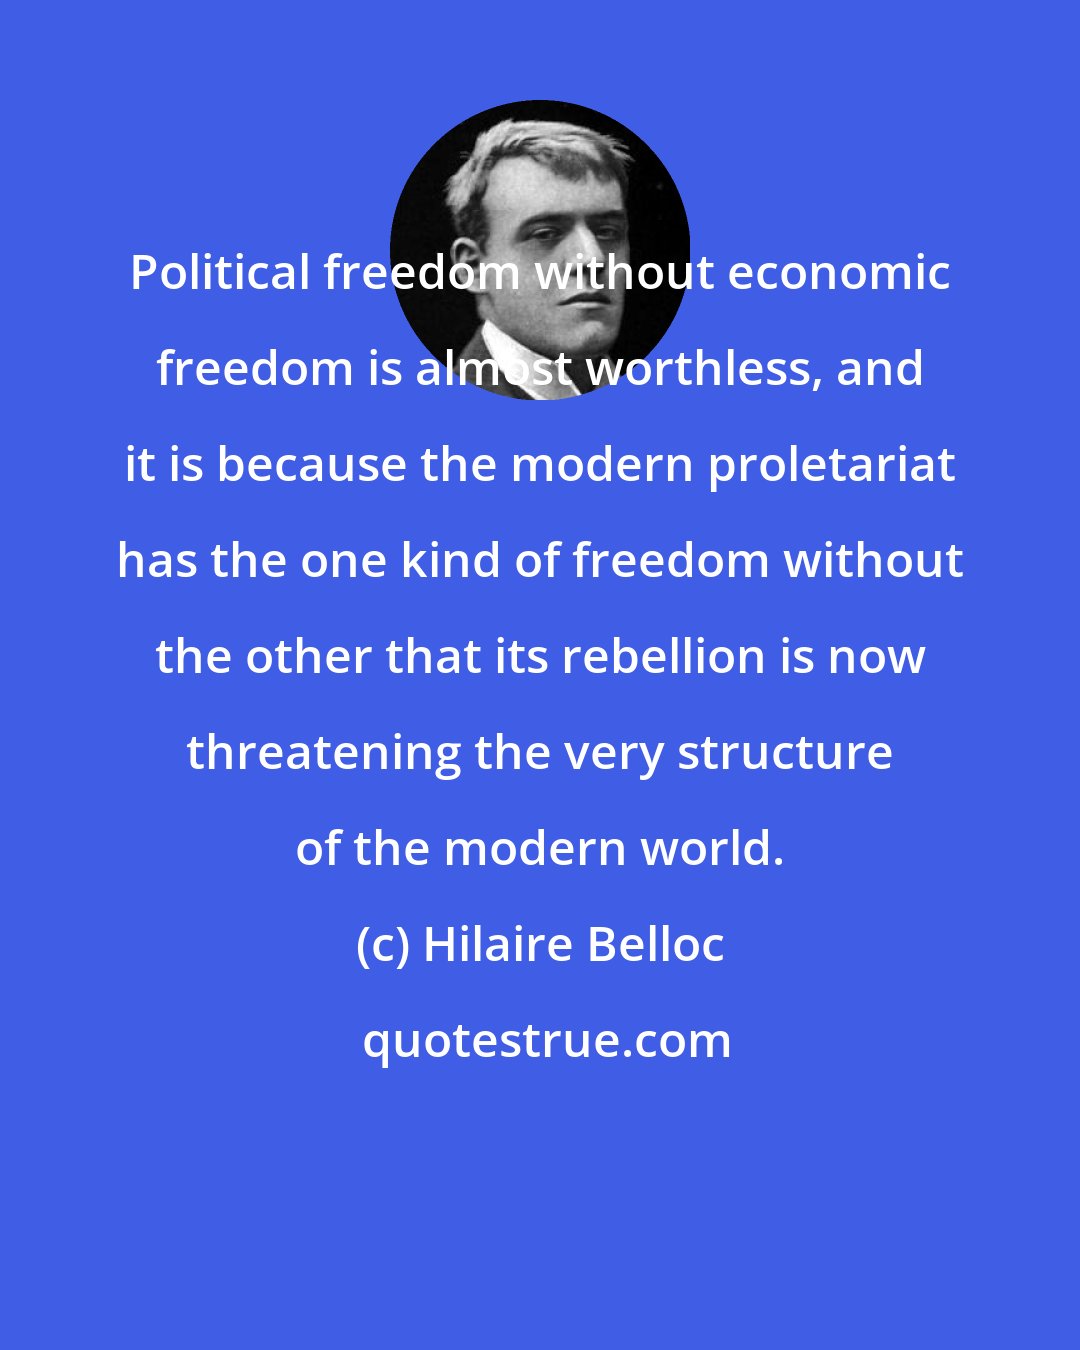 Hilaire Belloc: Political freedom without economic freedom is almost worthless, and it is because the modern proletariat has the one kind of freedom without the other that its rebellion is now threatening the very structure of the modern world.